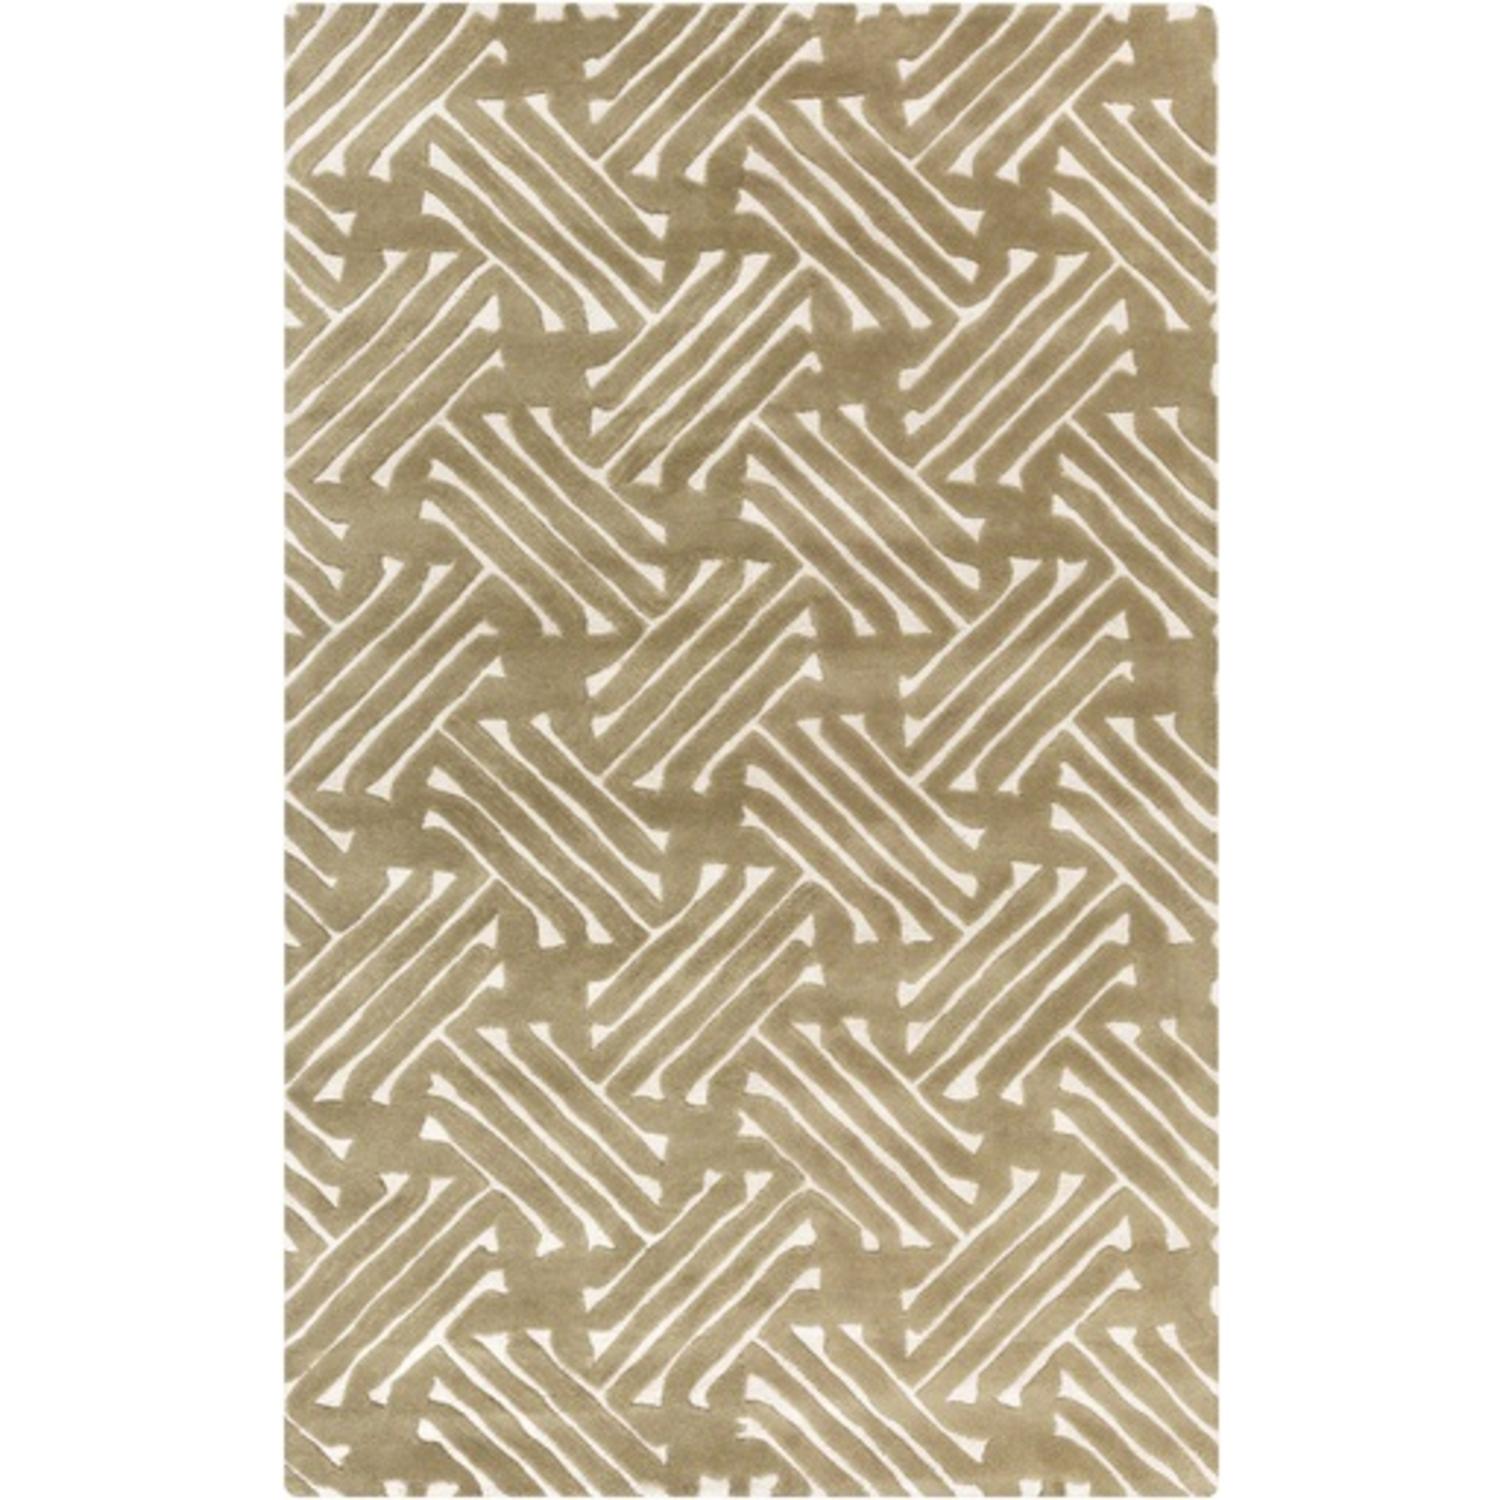 Diva At Home 5' x 8' Labyrinth Luster Olive Green and Pearl Beige Wool Hand Tufted Area Throw Rug